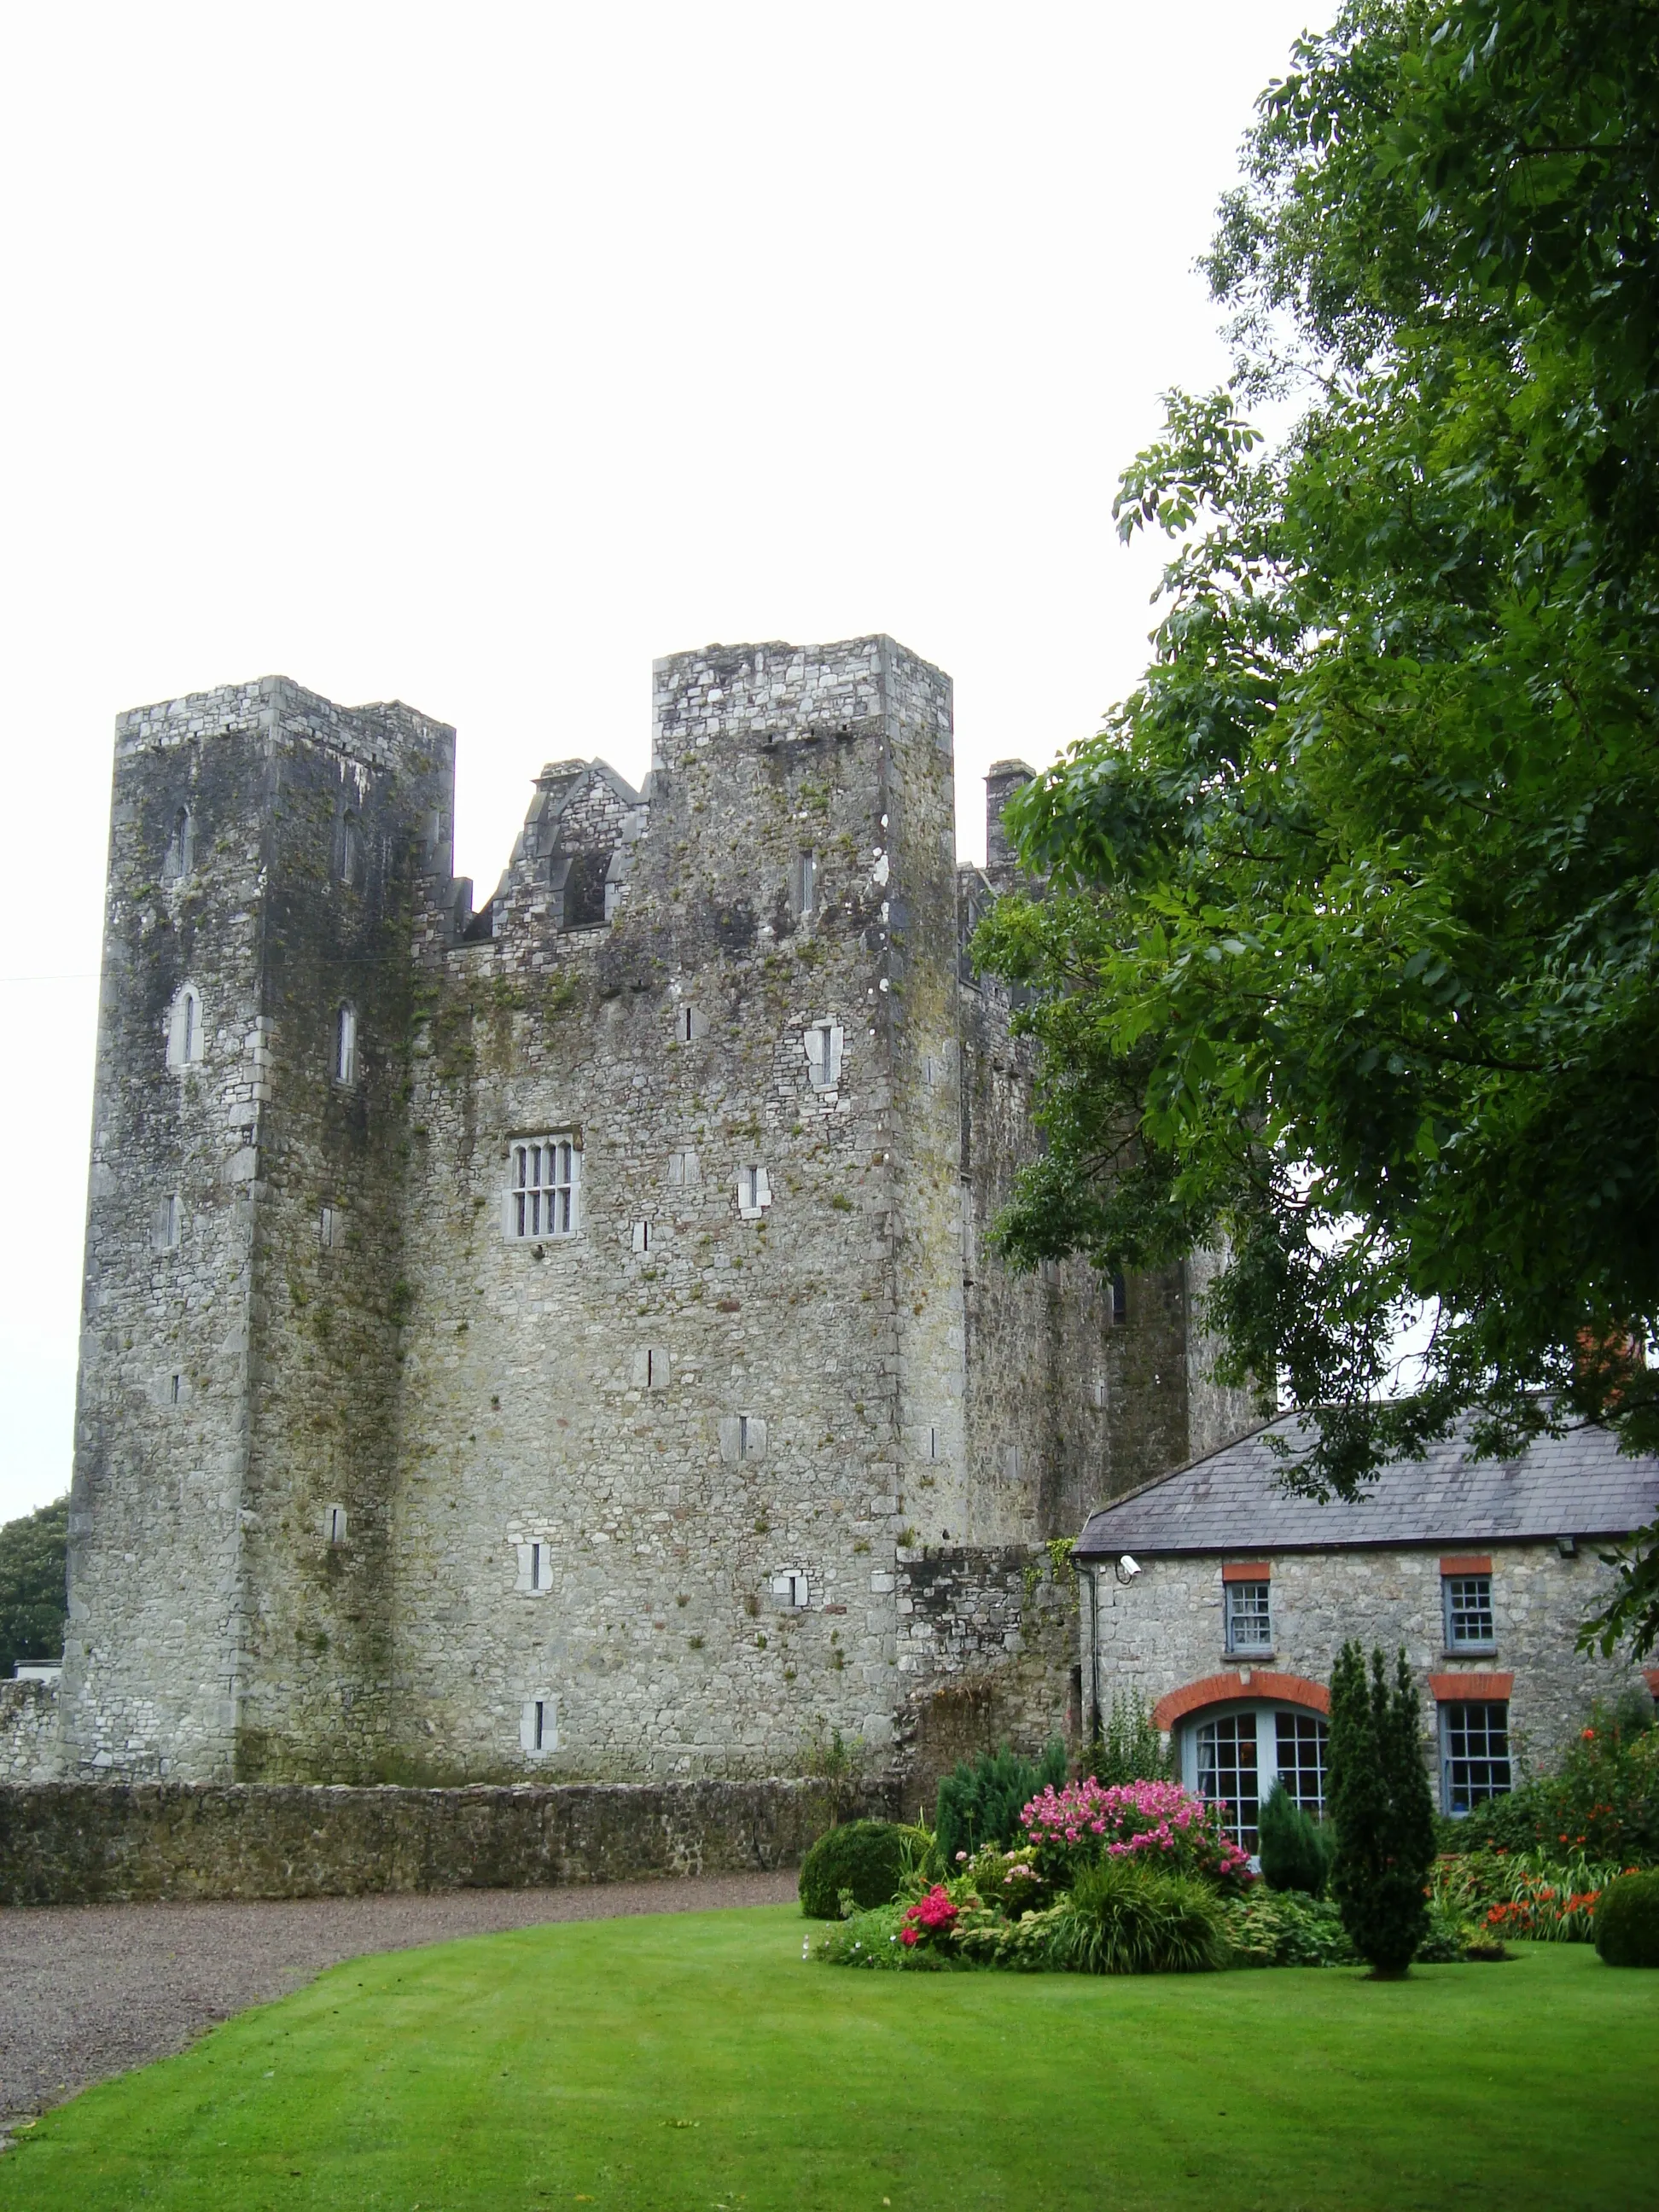 Photo showing: Barryscourt castle was built in a style fairly typical in Ireland in the 16th century, consisting of a main tower house building with smaller adjacent buildings arranged around a courtyard, which was protected by an outer "bawn" or curtain wall, with 3 smaller corner towers.